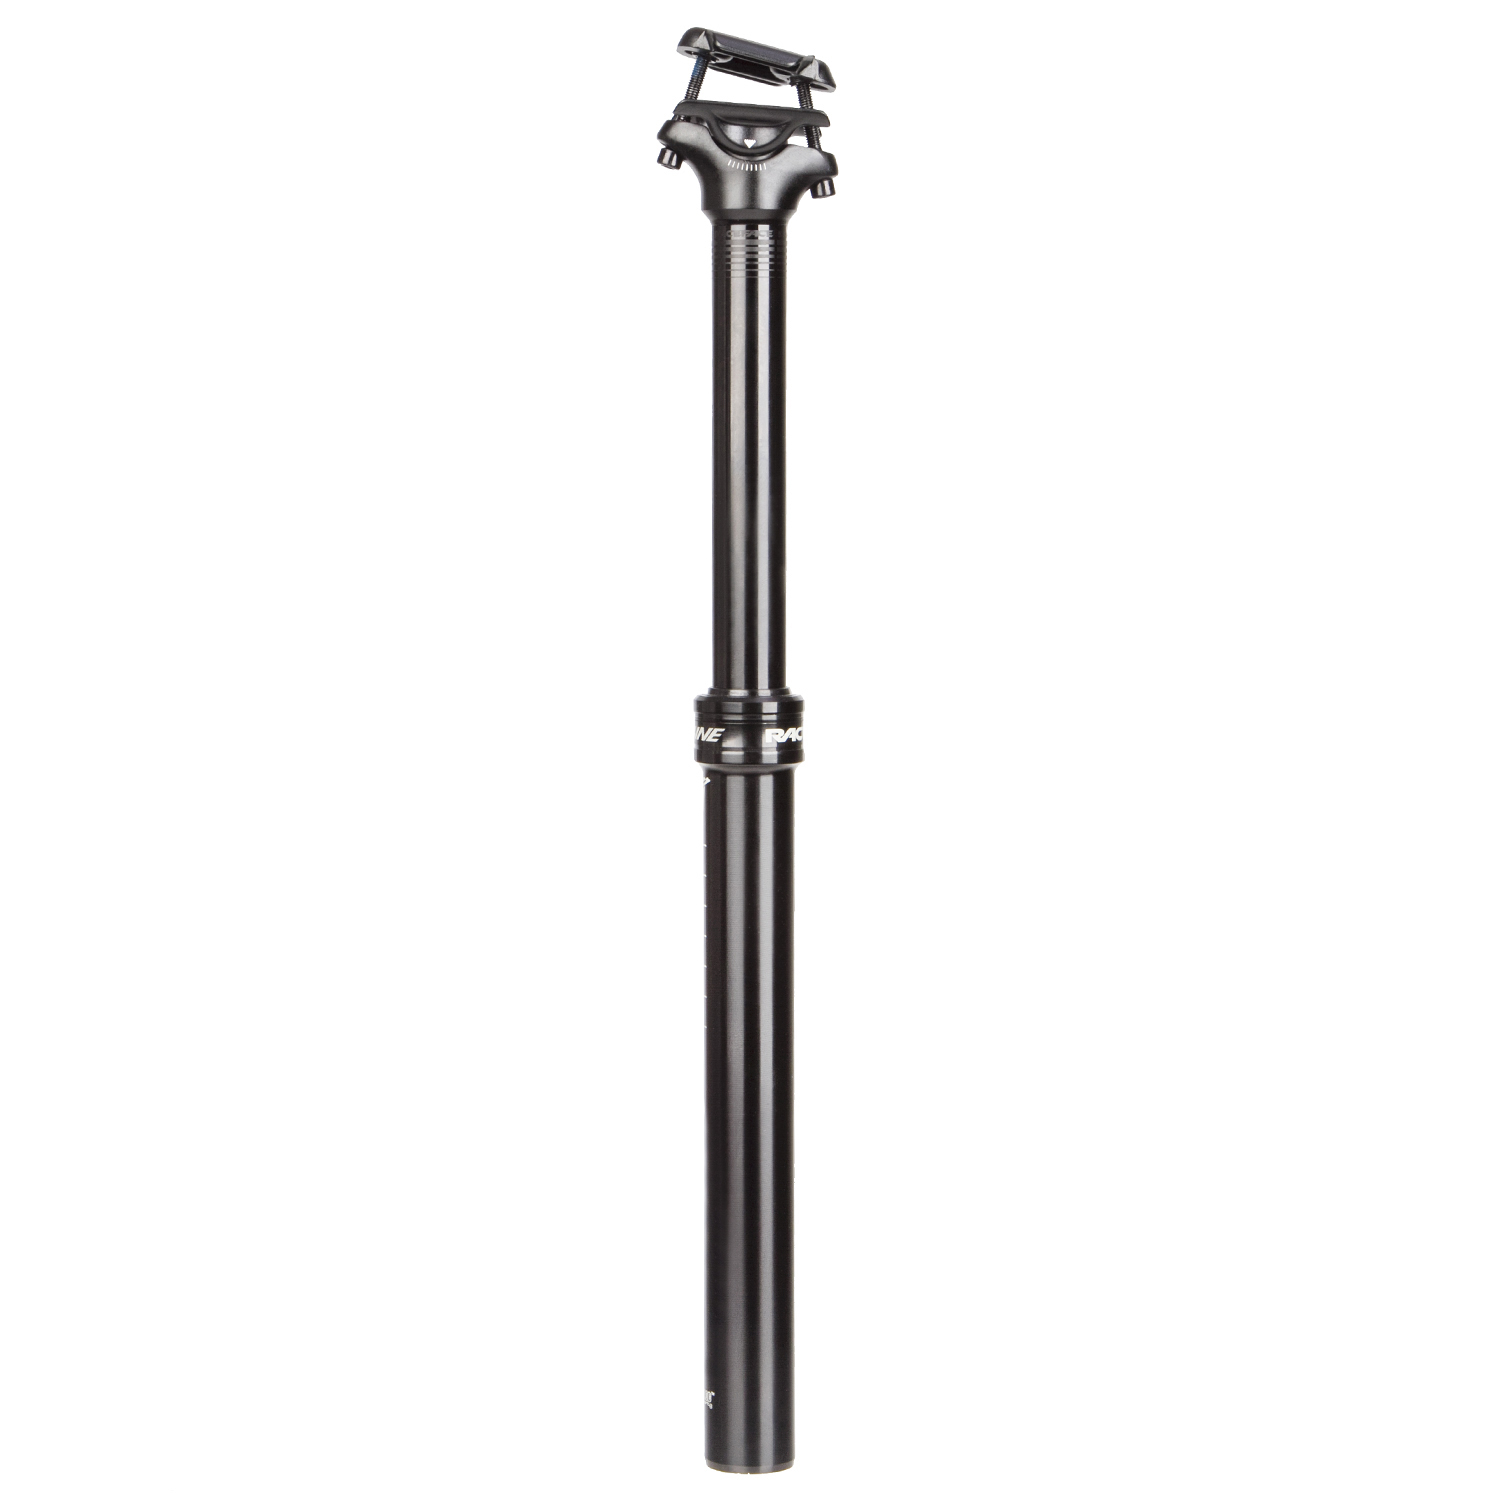 Race Face Seat Post Turbine Dropper Black, 30.9 x 375-125 mm, with Remote